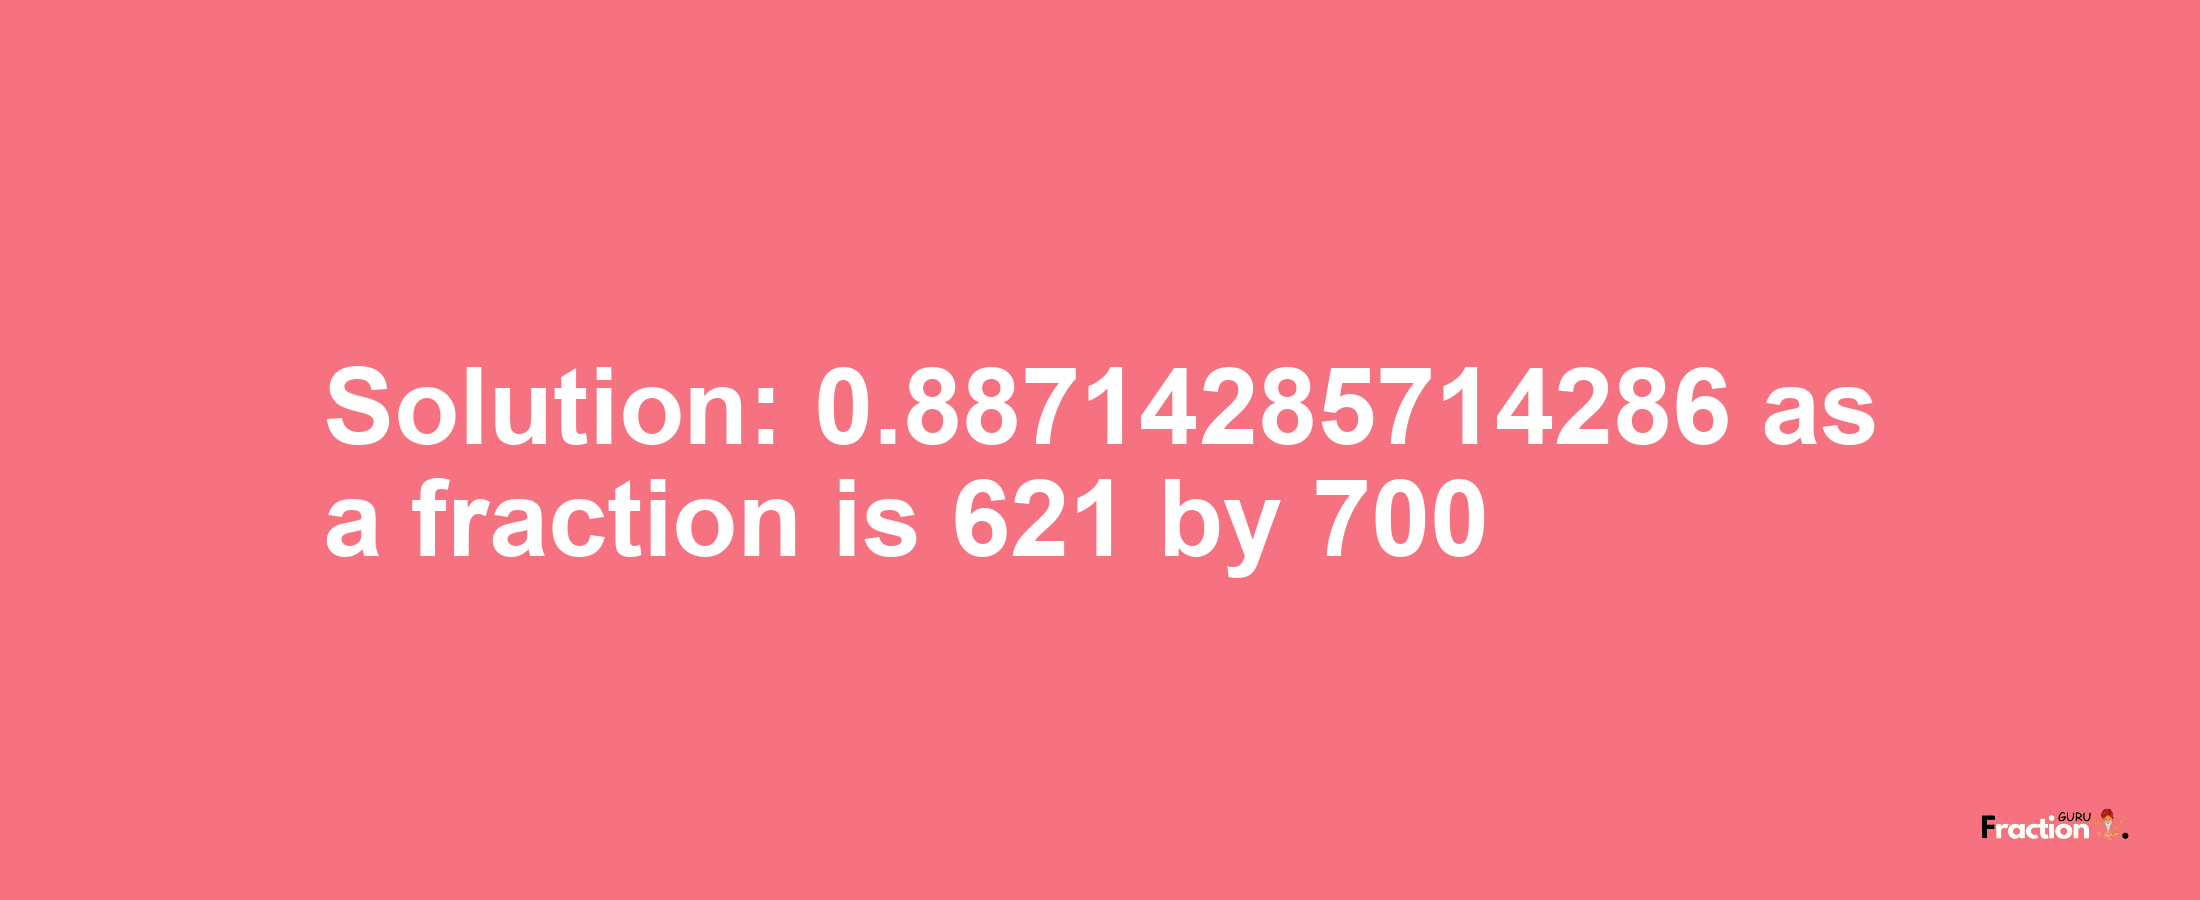 Solution:0.88714285714286 as a fraction is 621/700